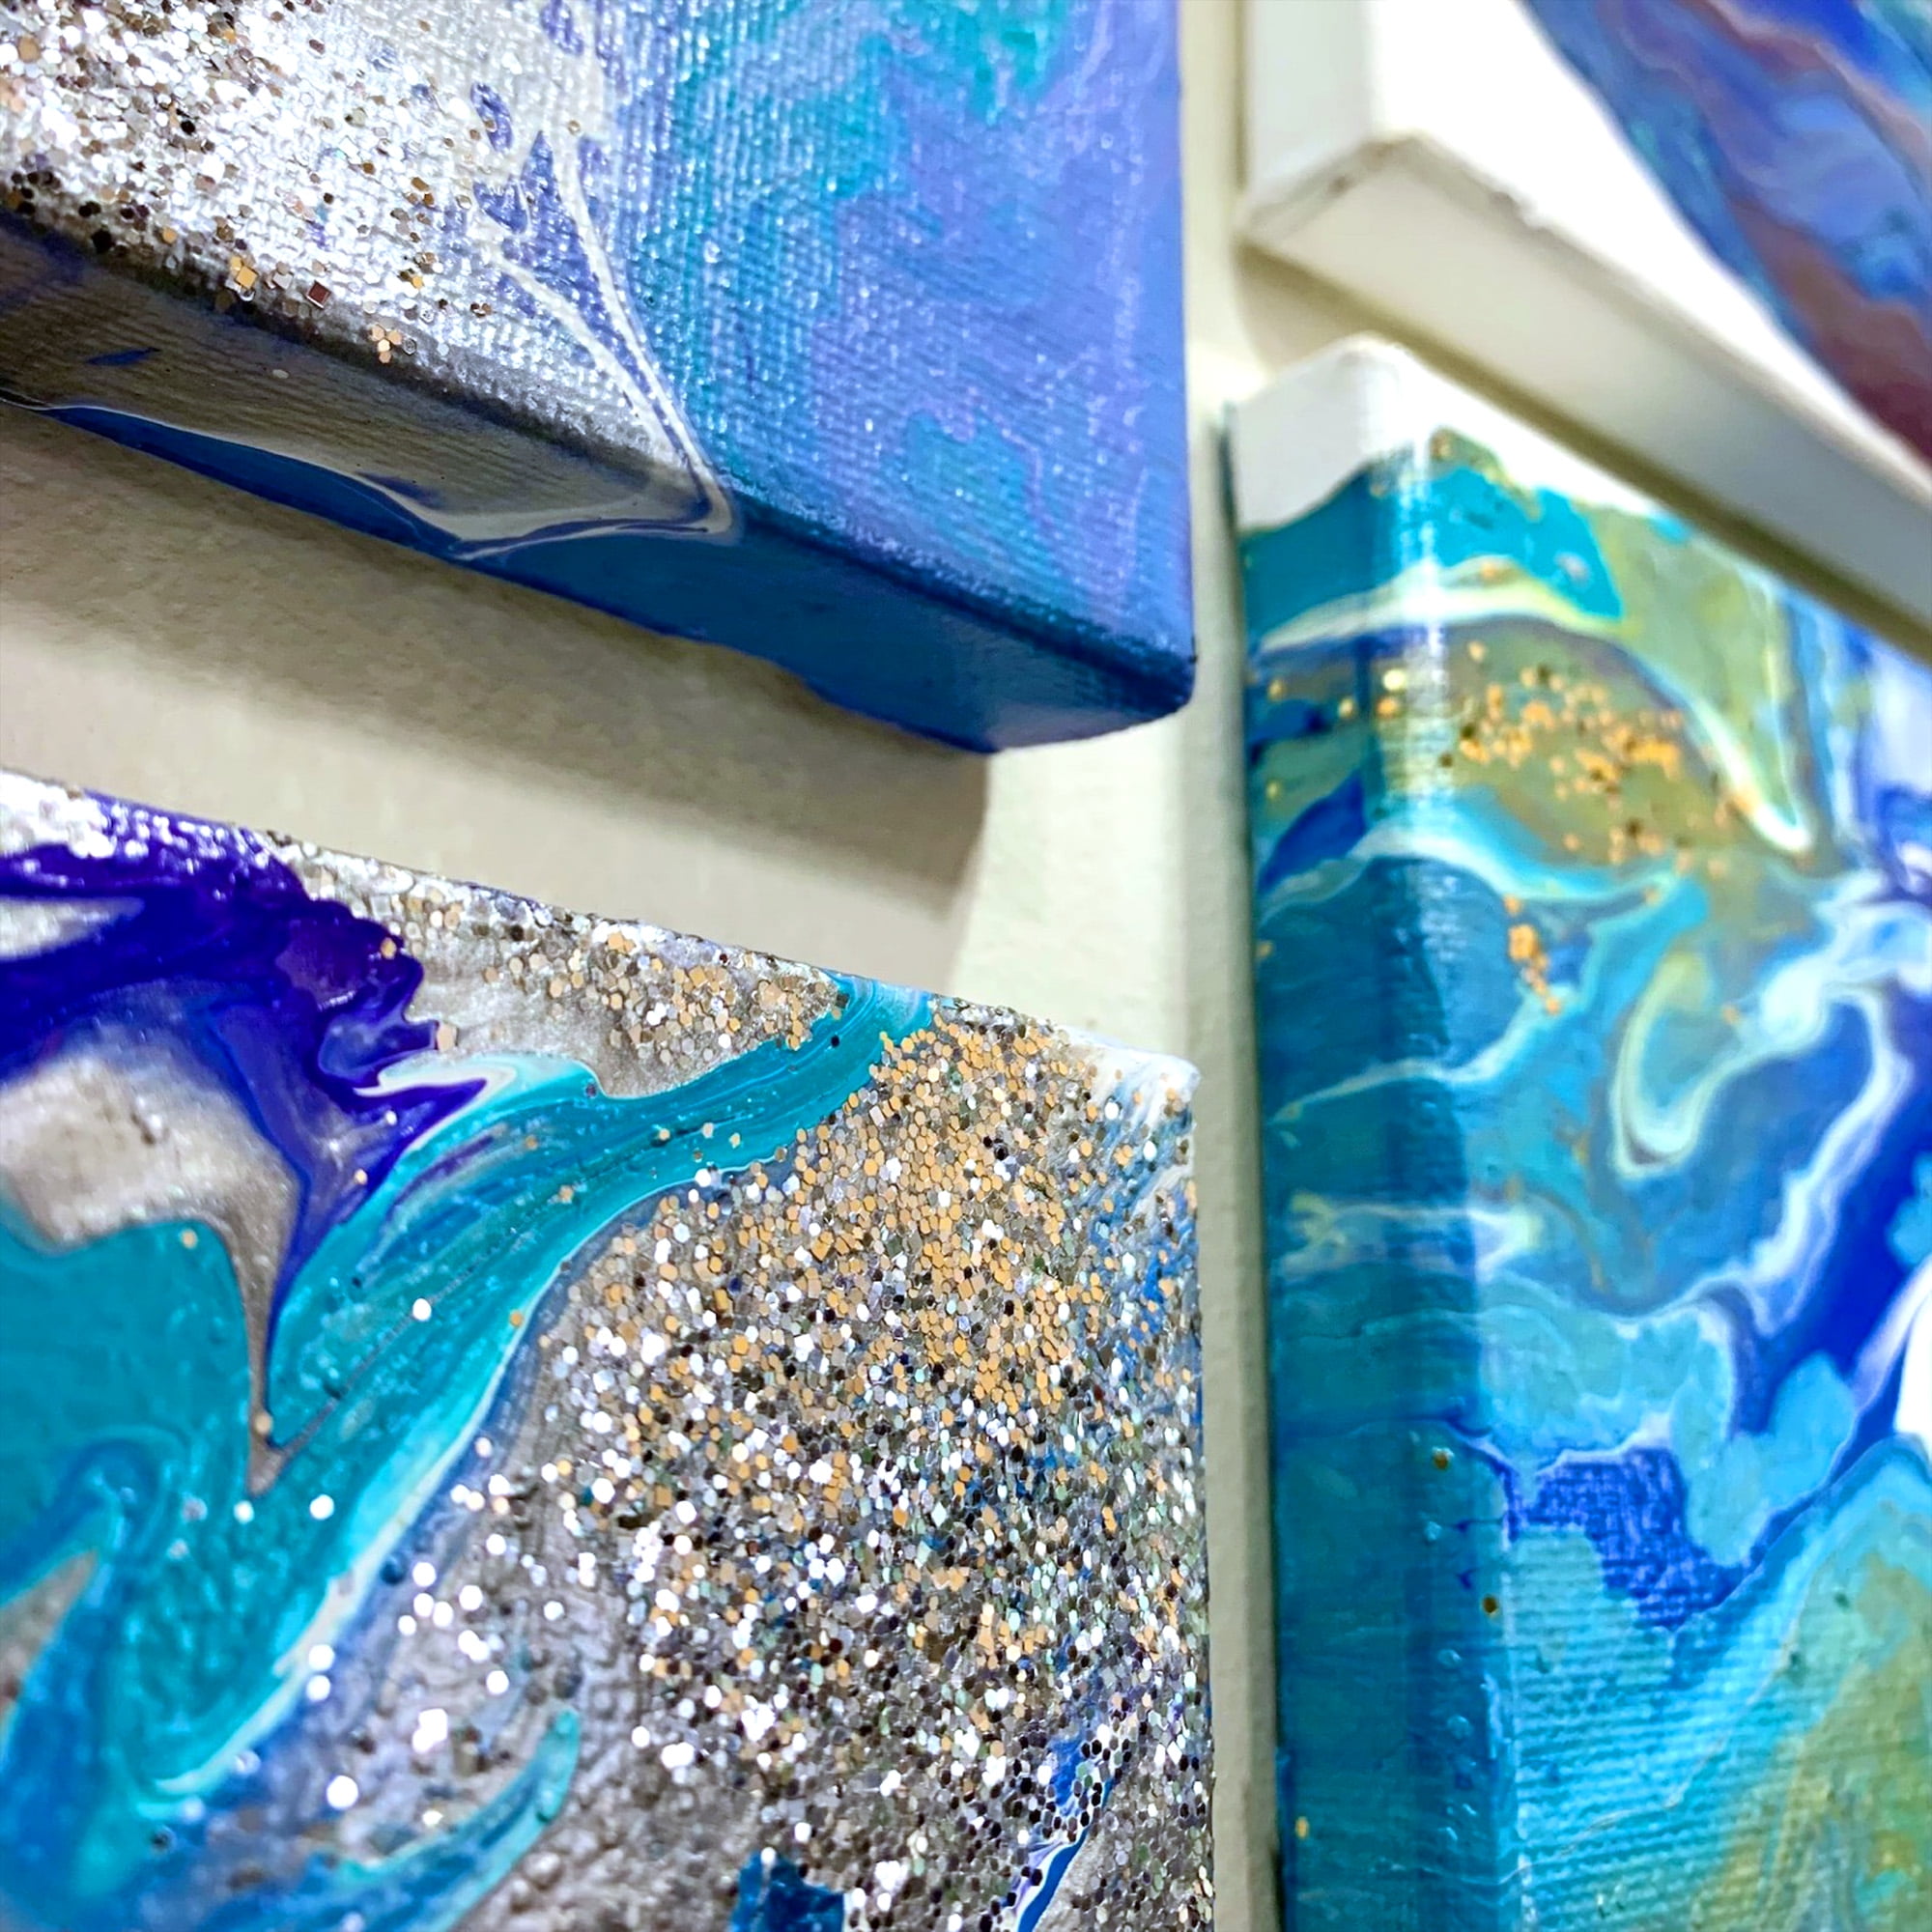 Best Spray Finish for Acrylic Pour Paintings (Test)